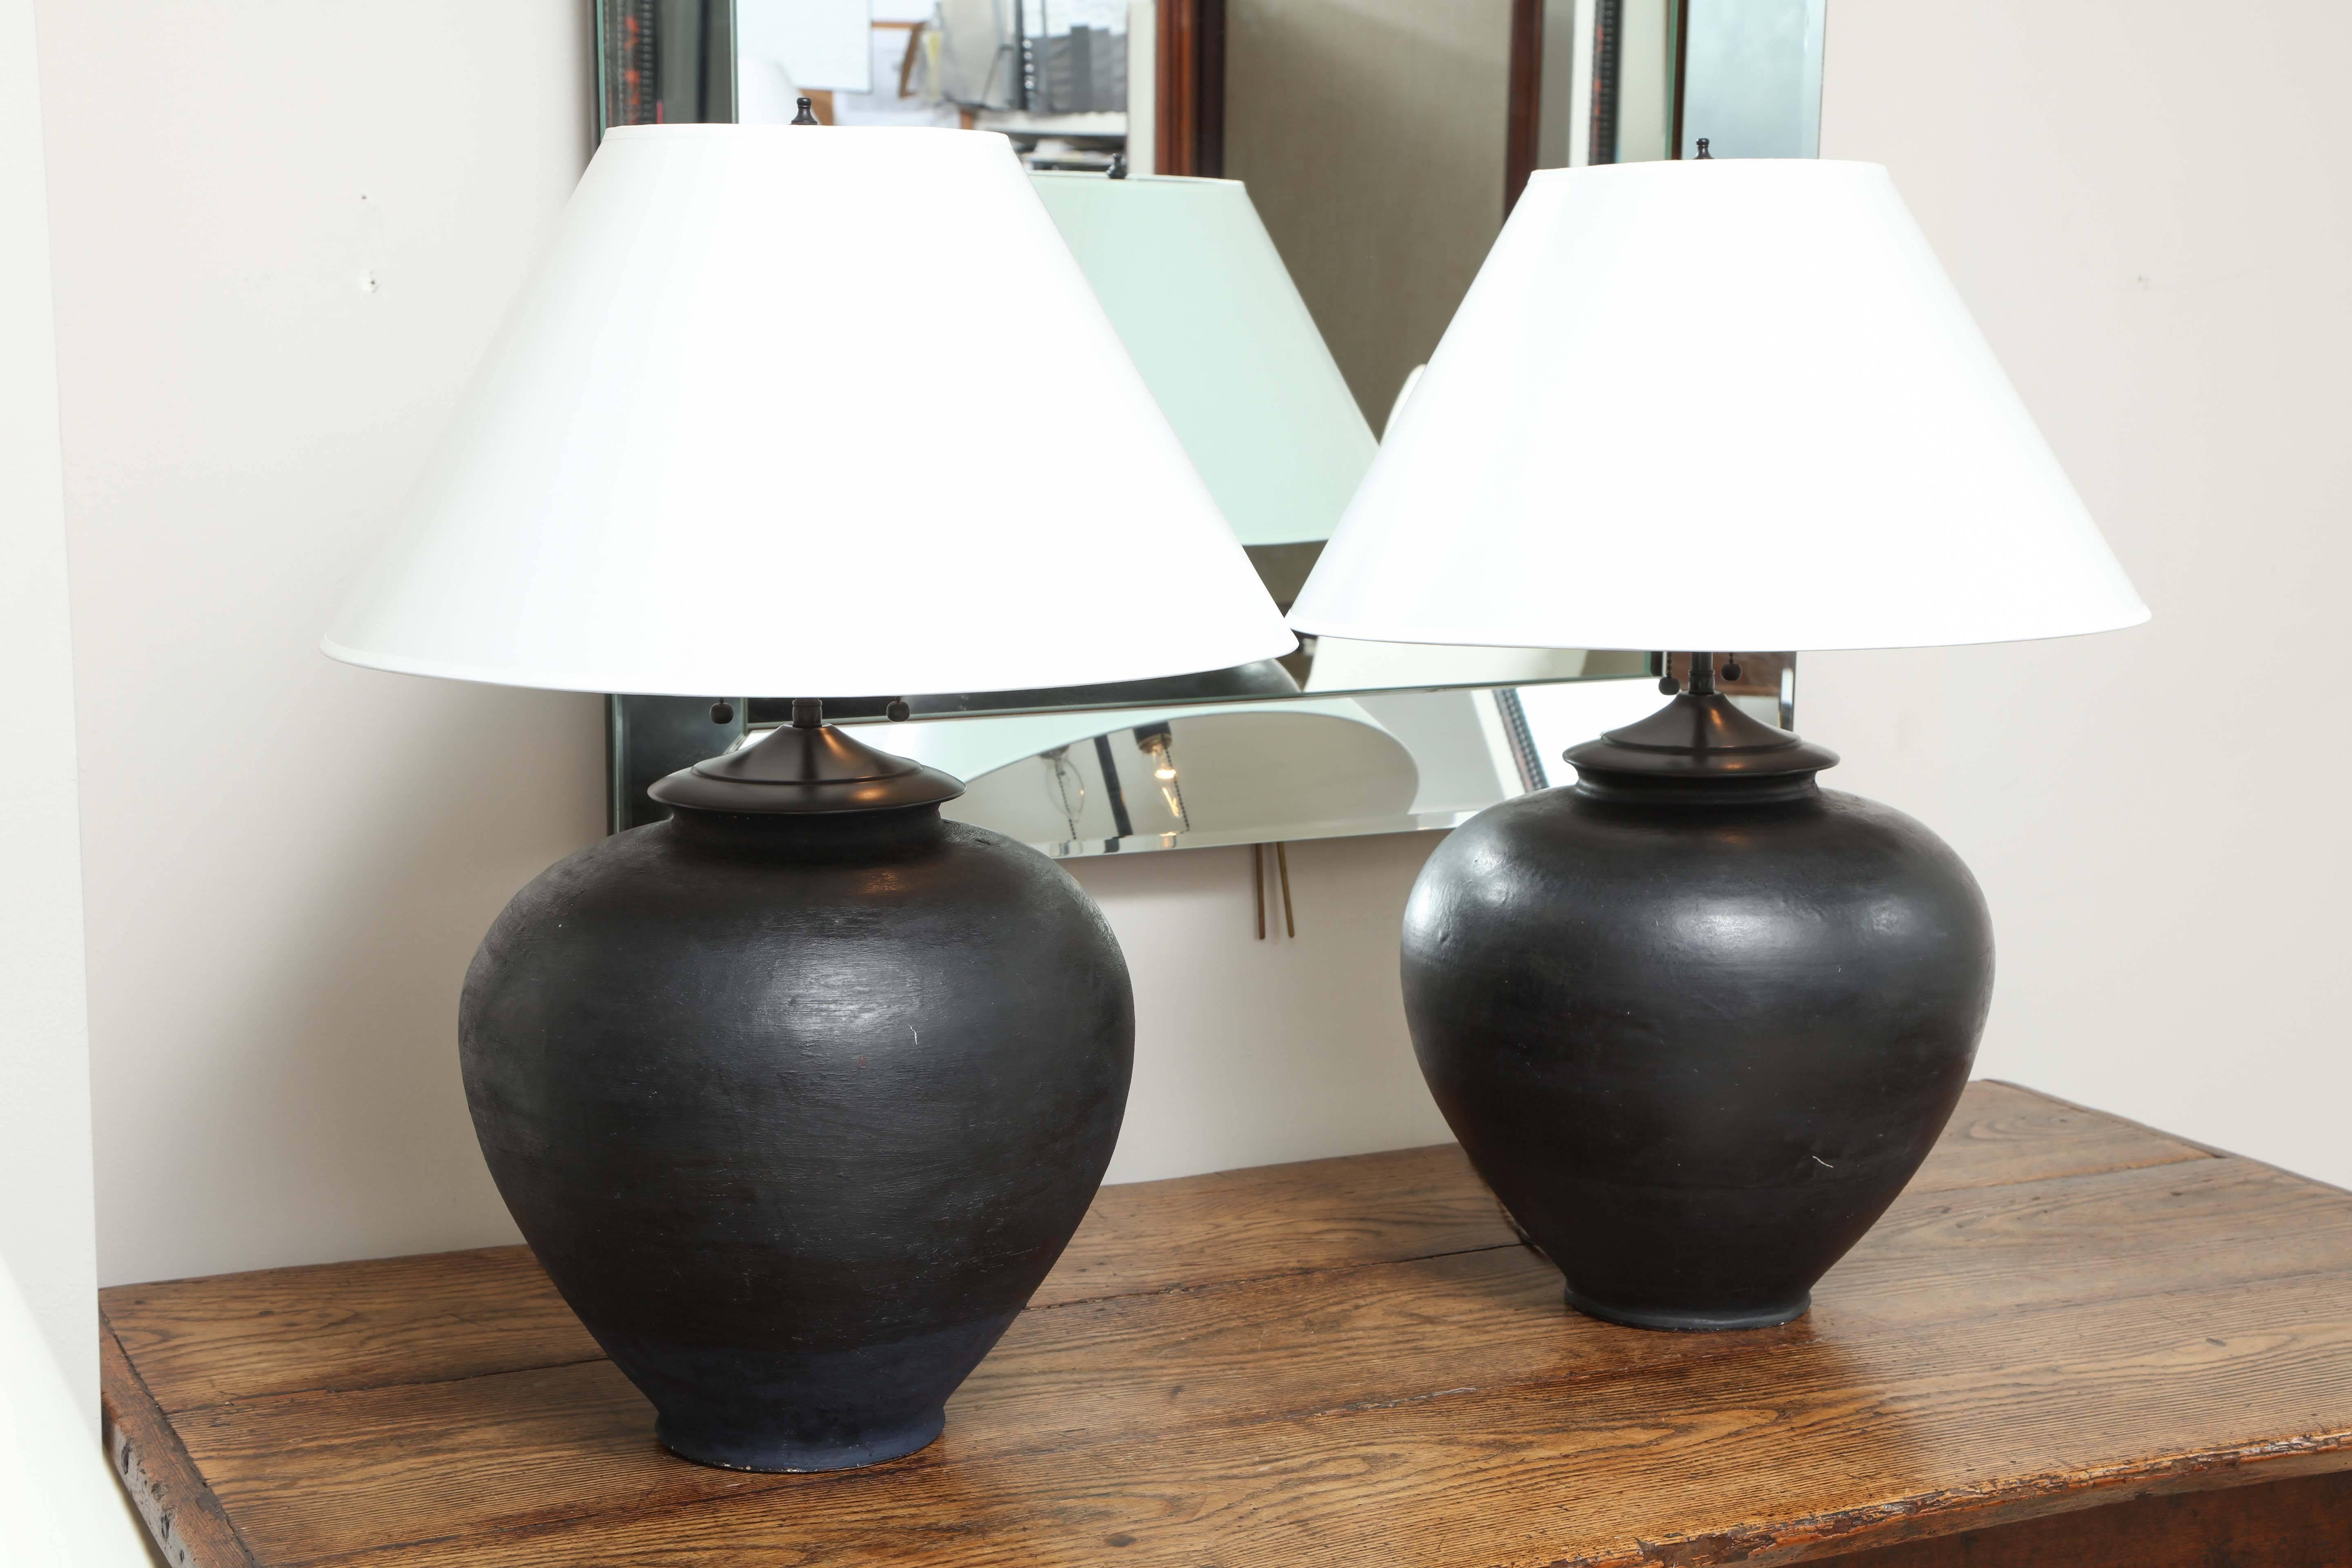 Pair of late 19th century terracotta wine vessel lamps, black glaze
Chinese.